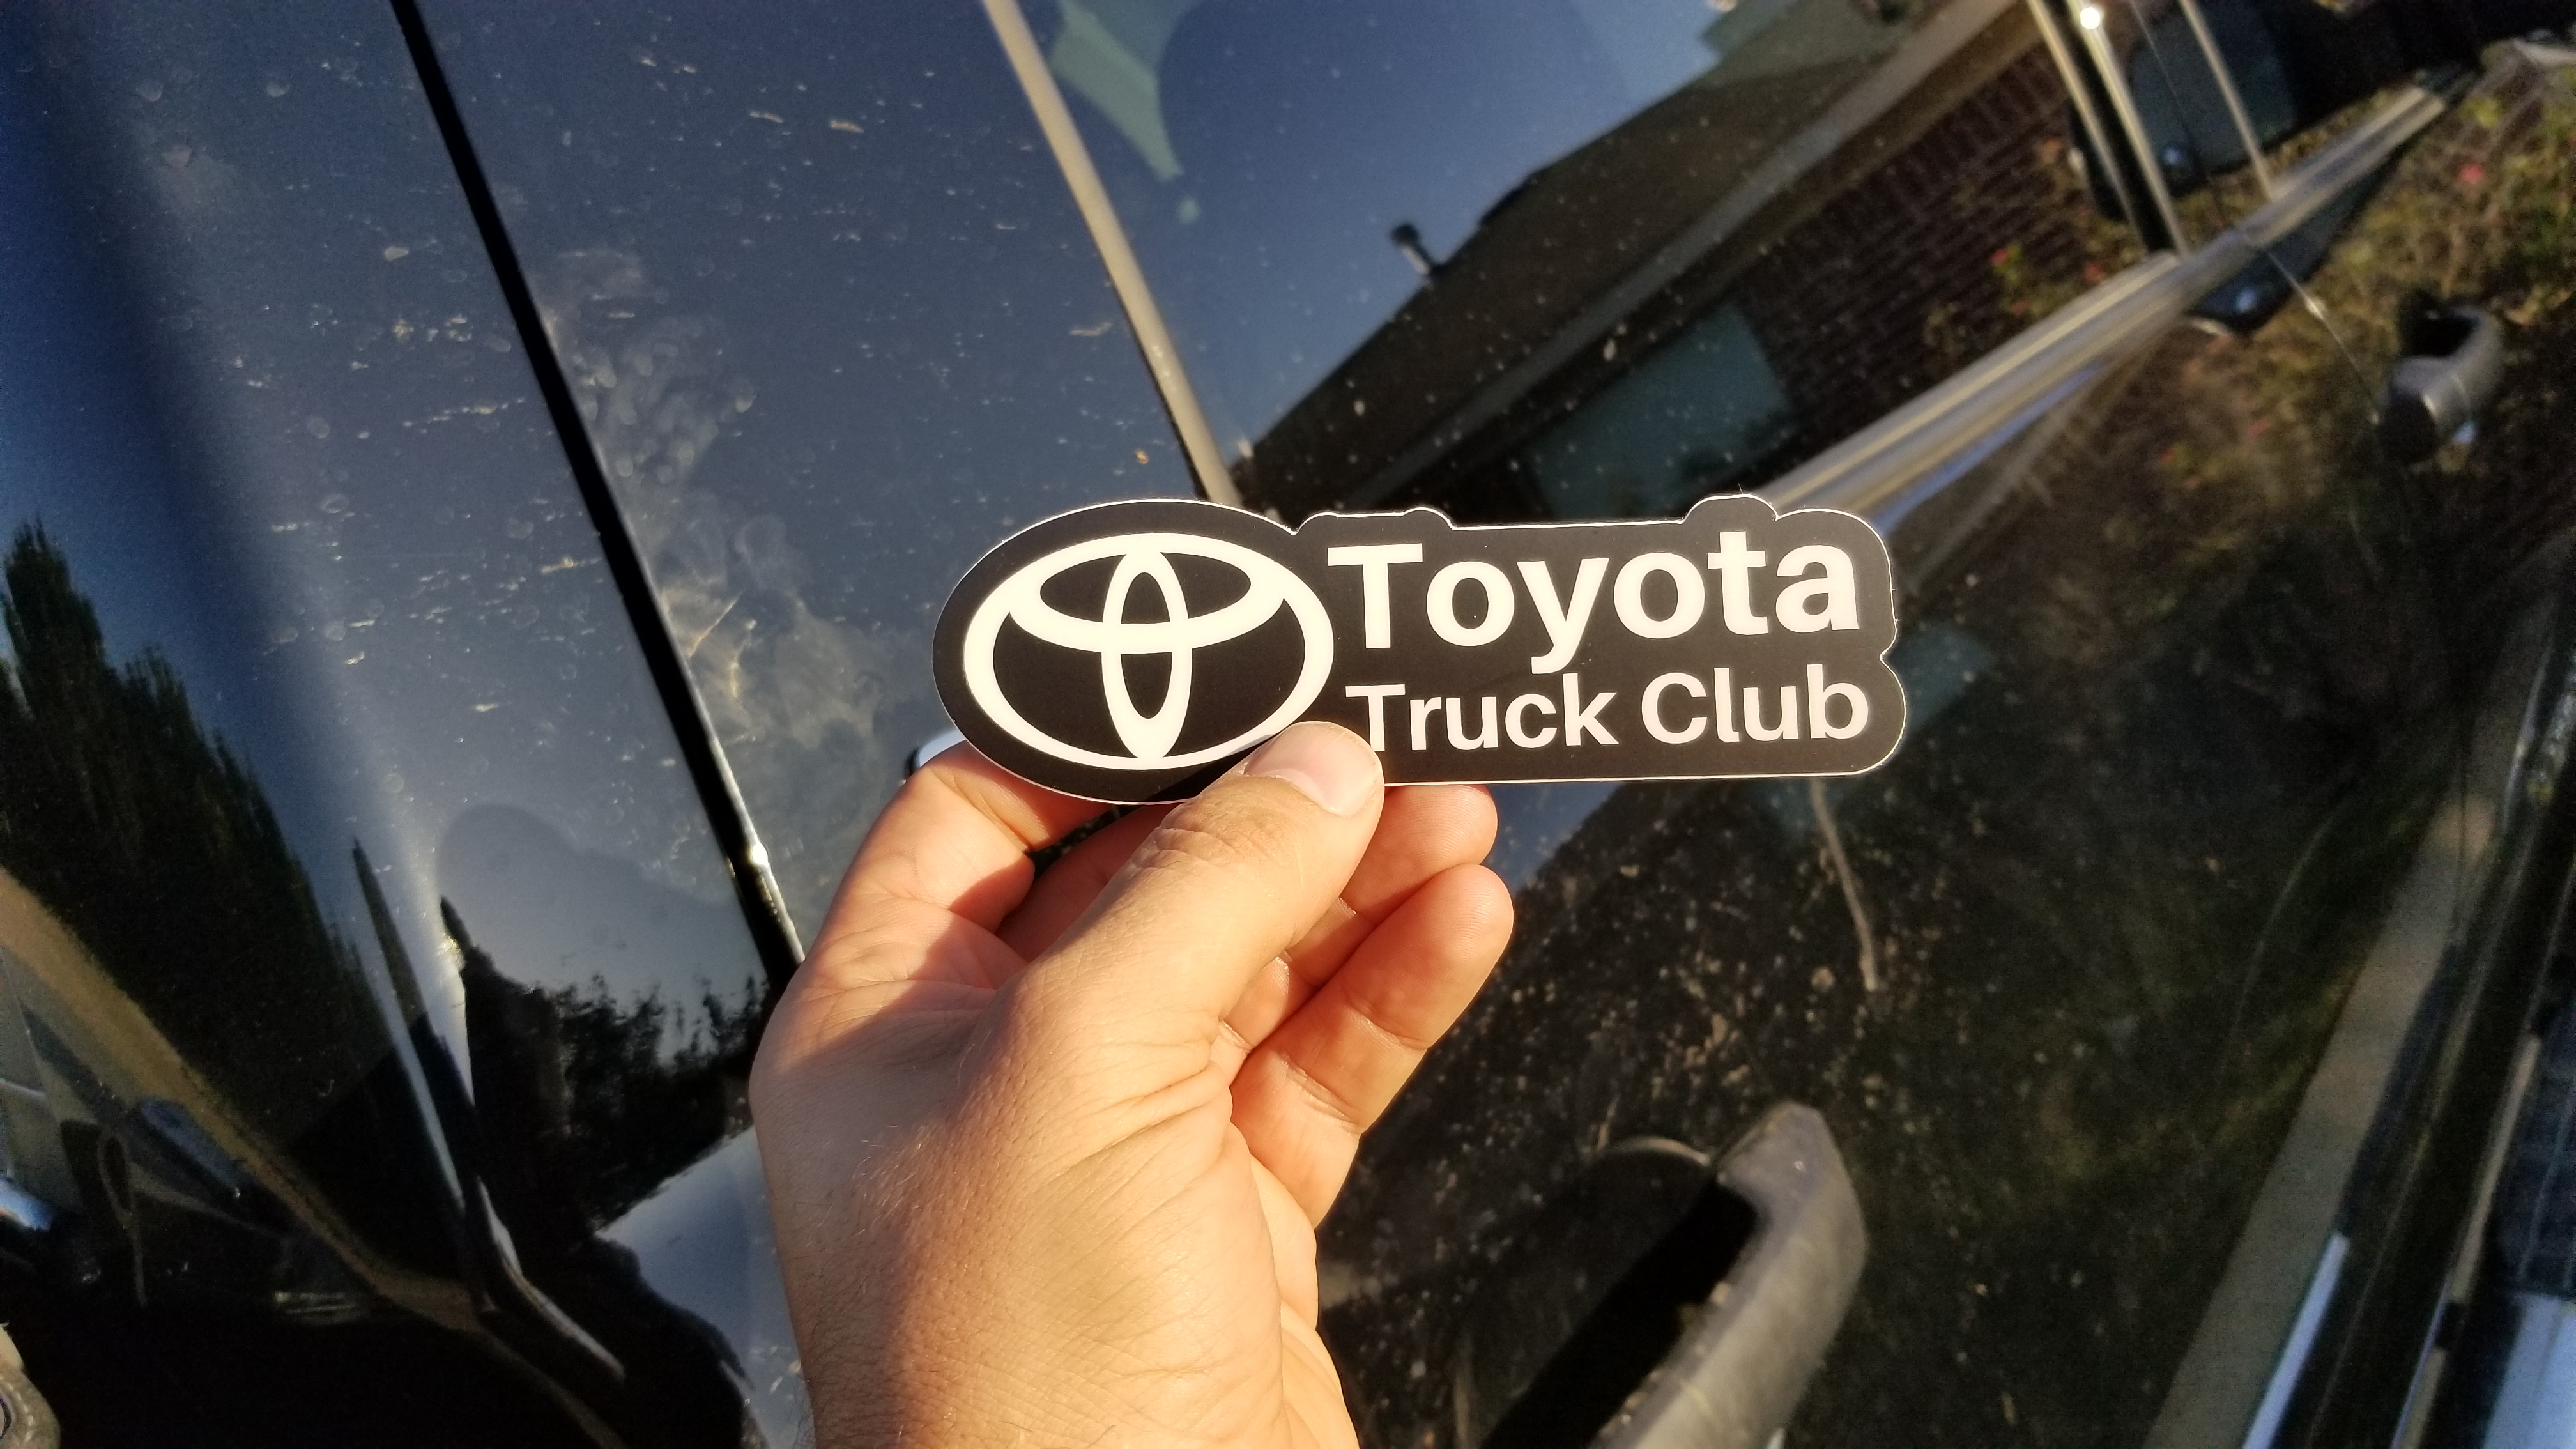 Toyota truck club stickers are in